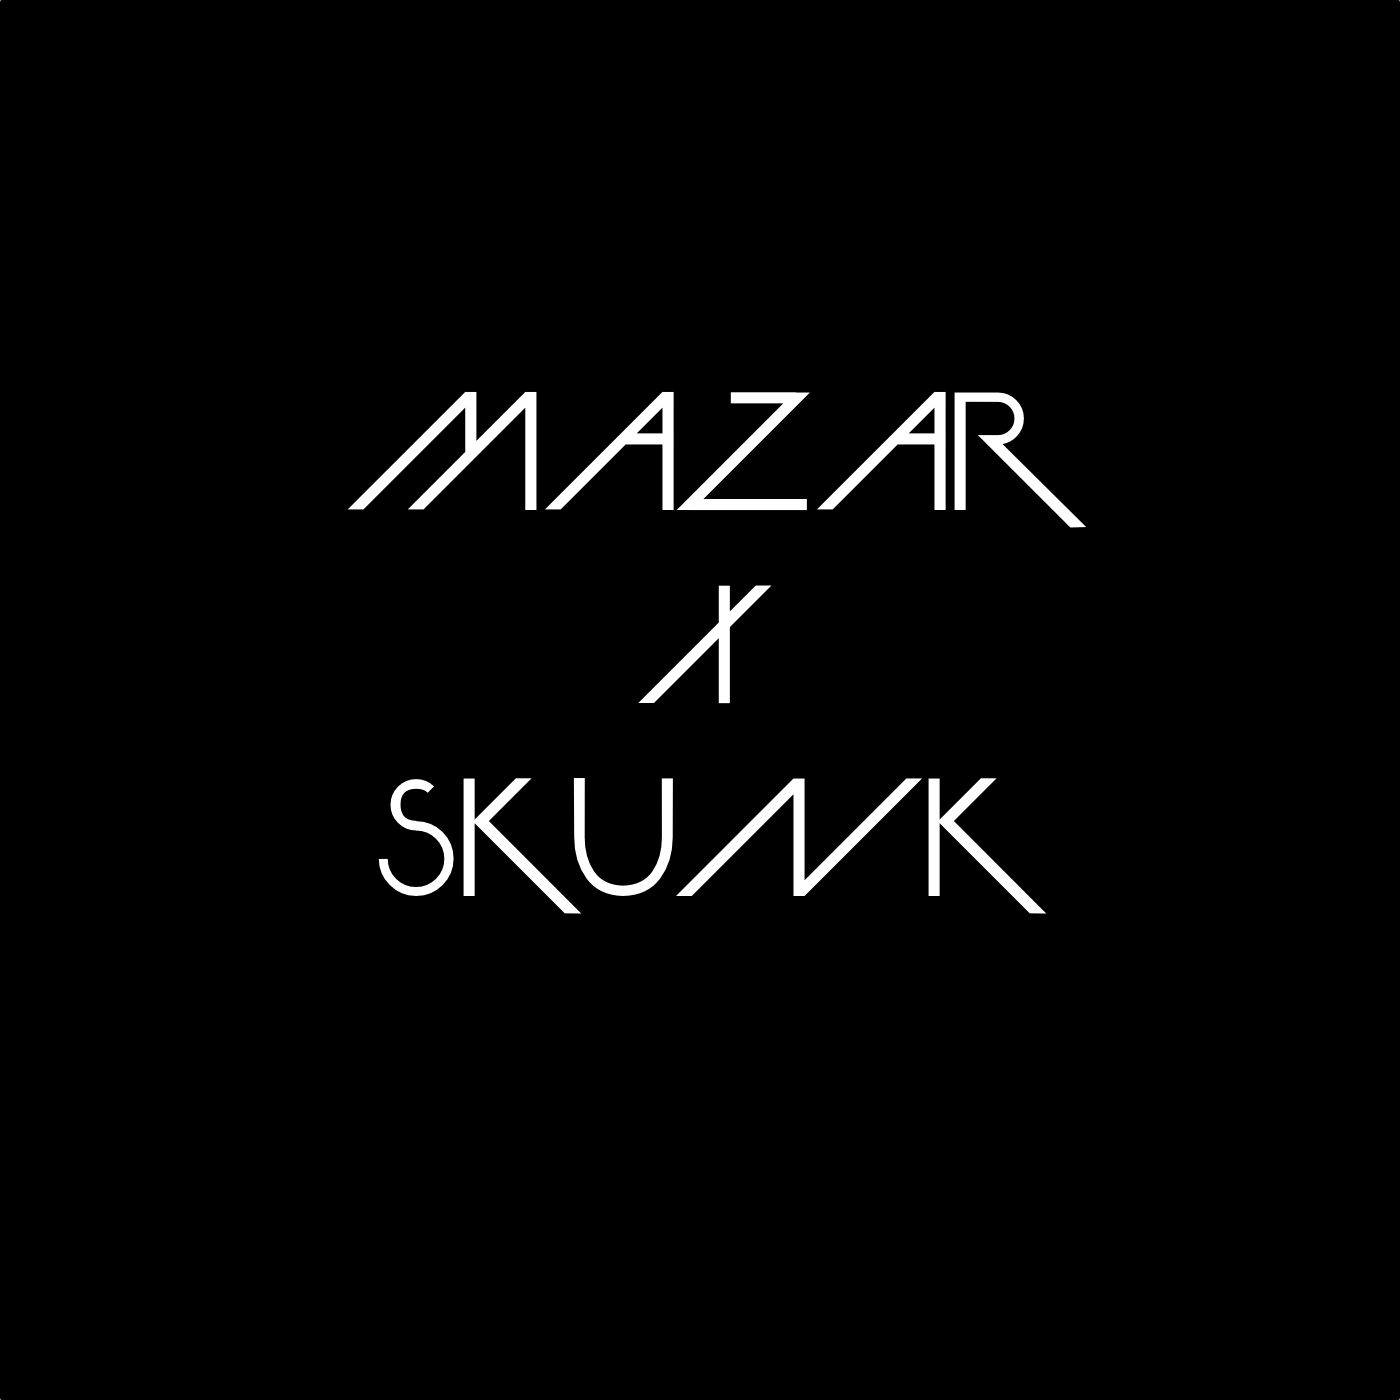 Podcast - Mazar and Skunk